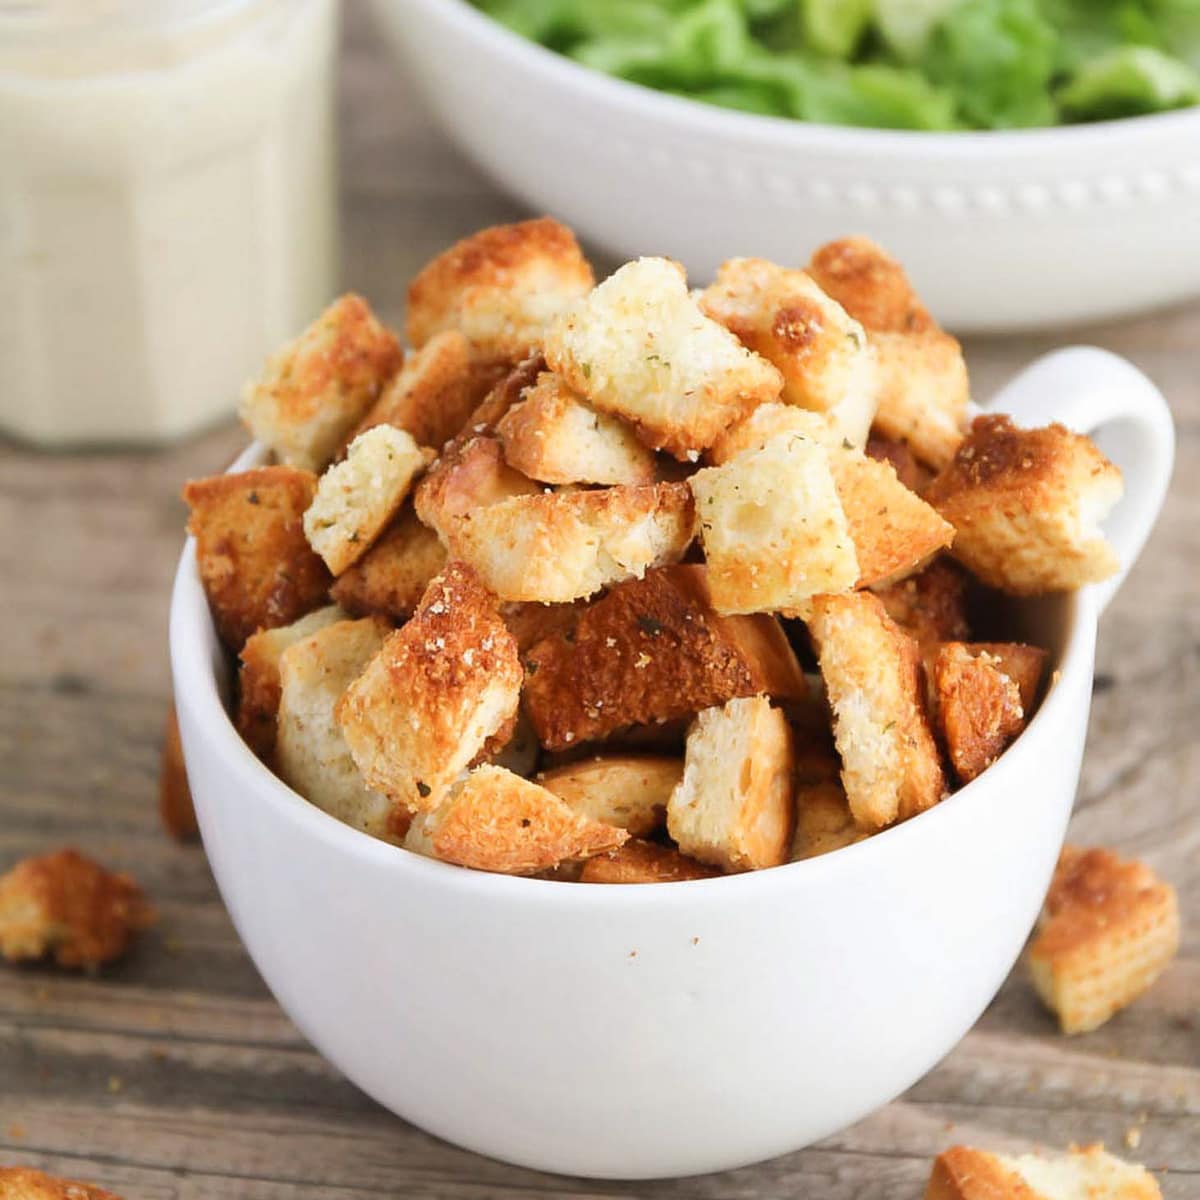 5 Ingredient Recipes - Bowl of homemade croutons for topping soups and salads.